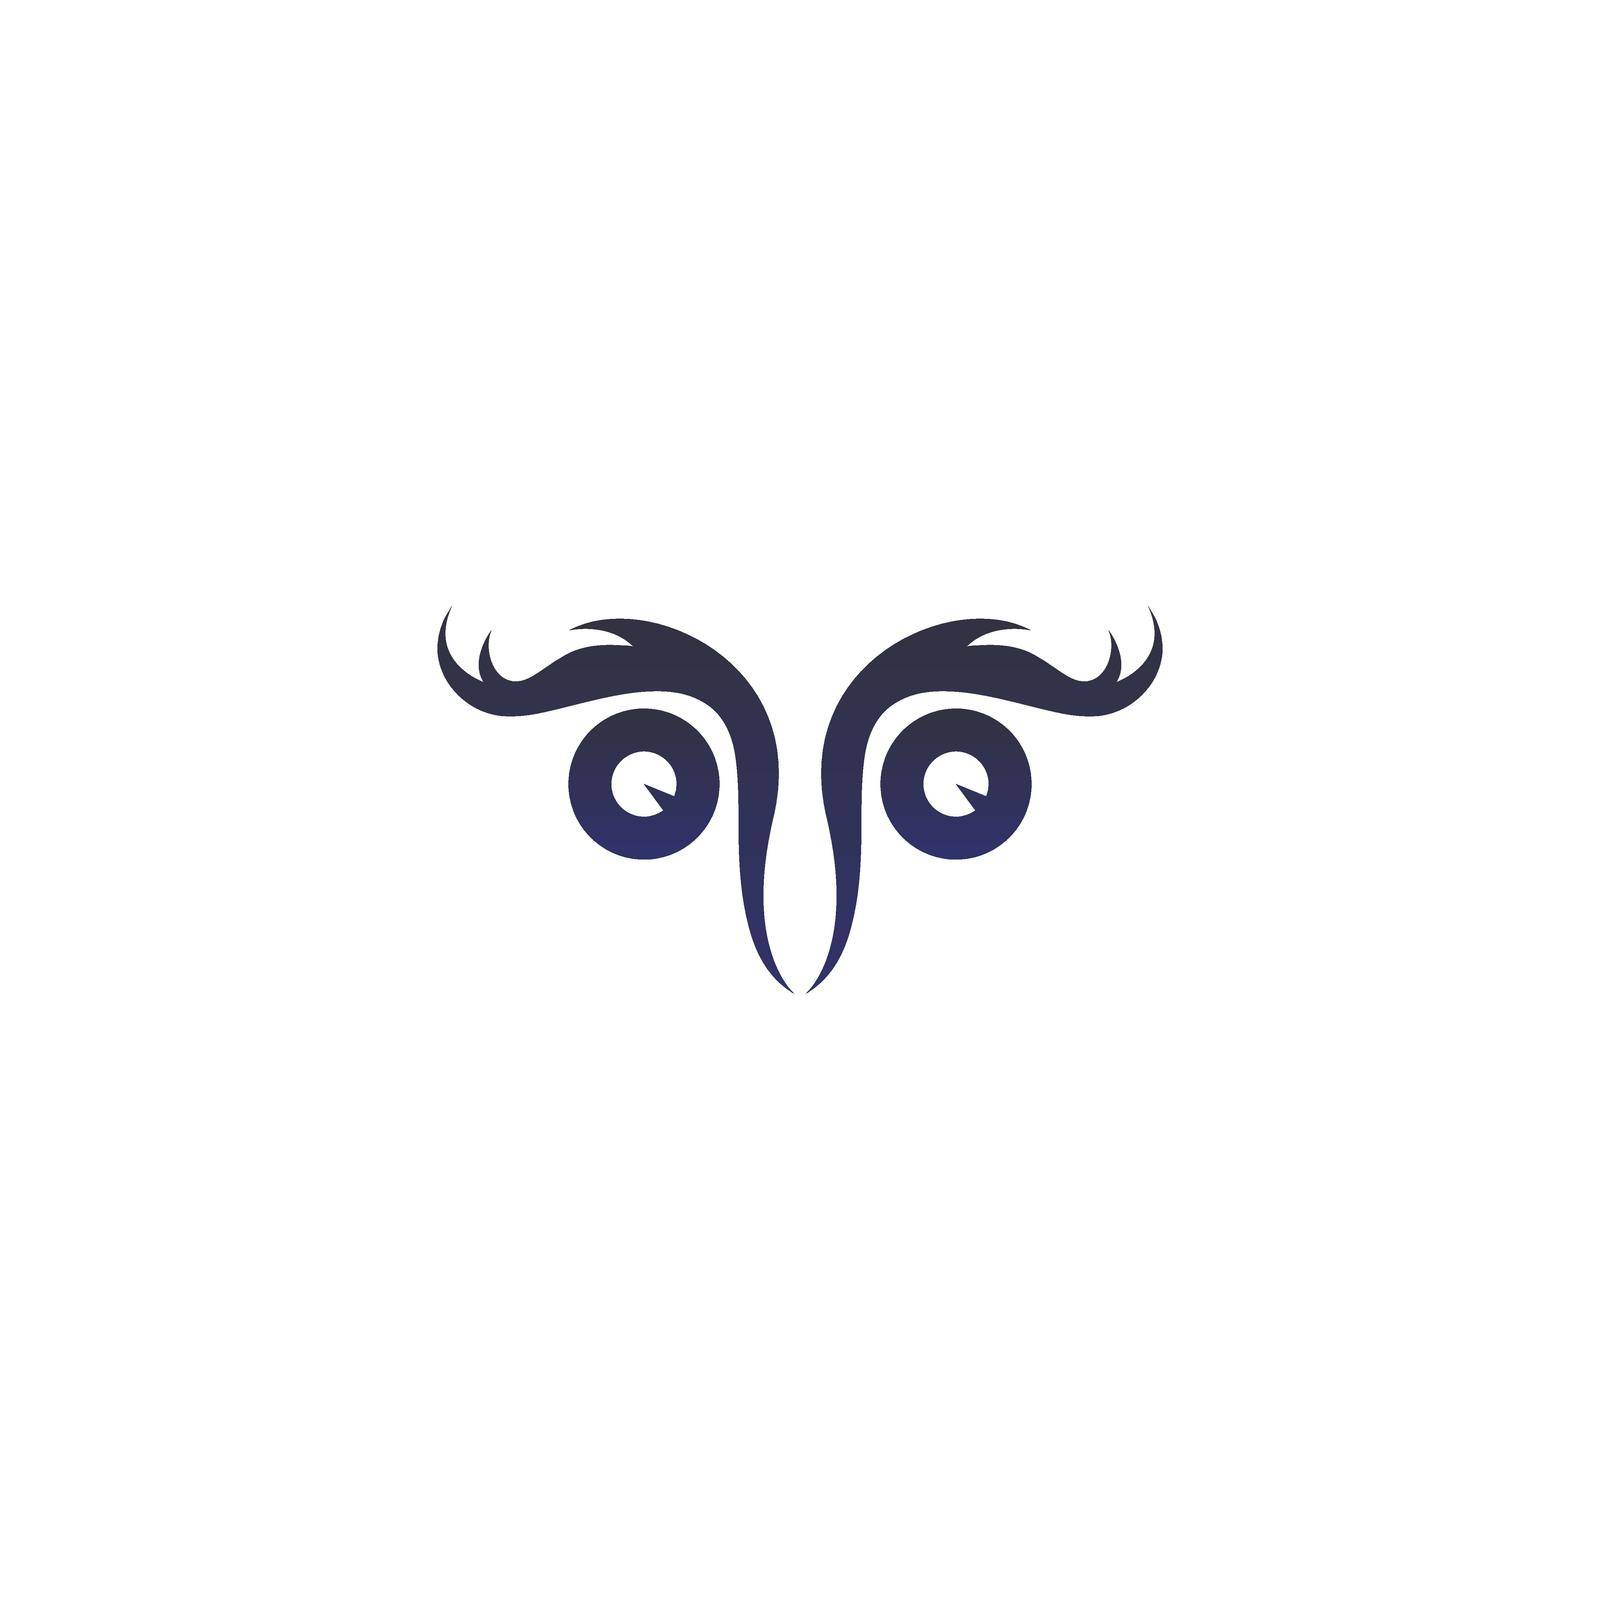 Owl logo vector icon design template by bellaxbudhong3